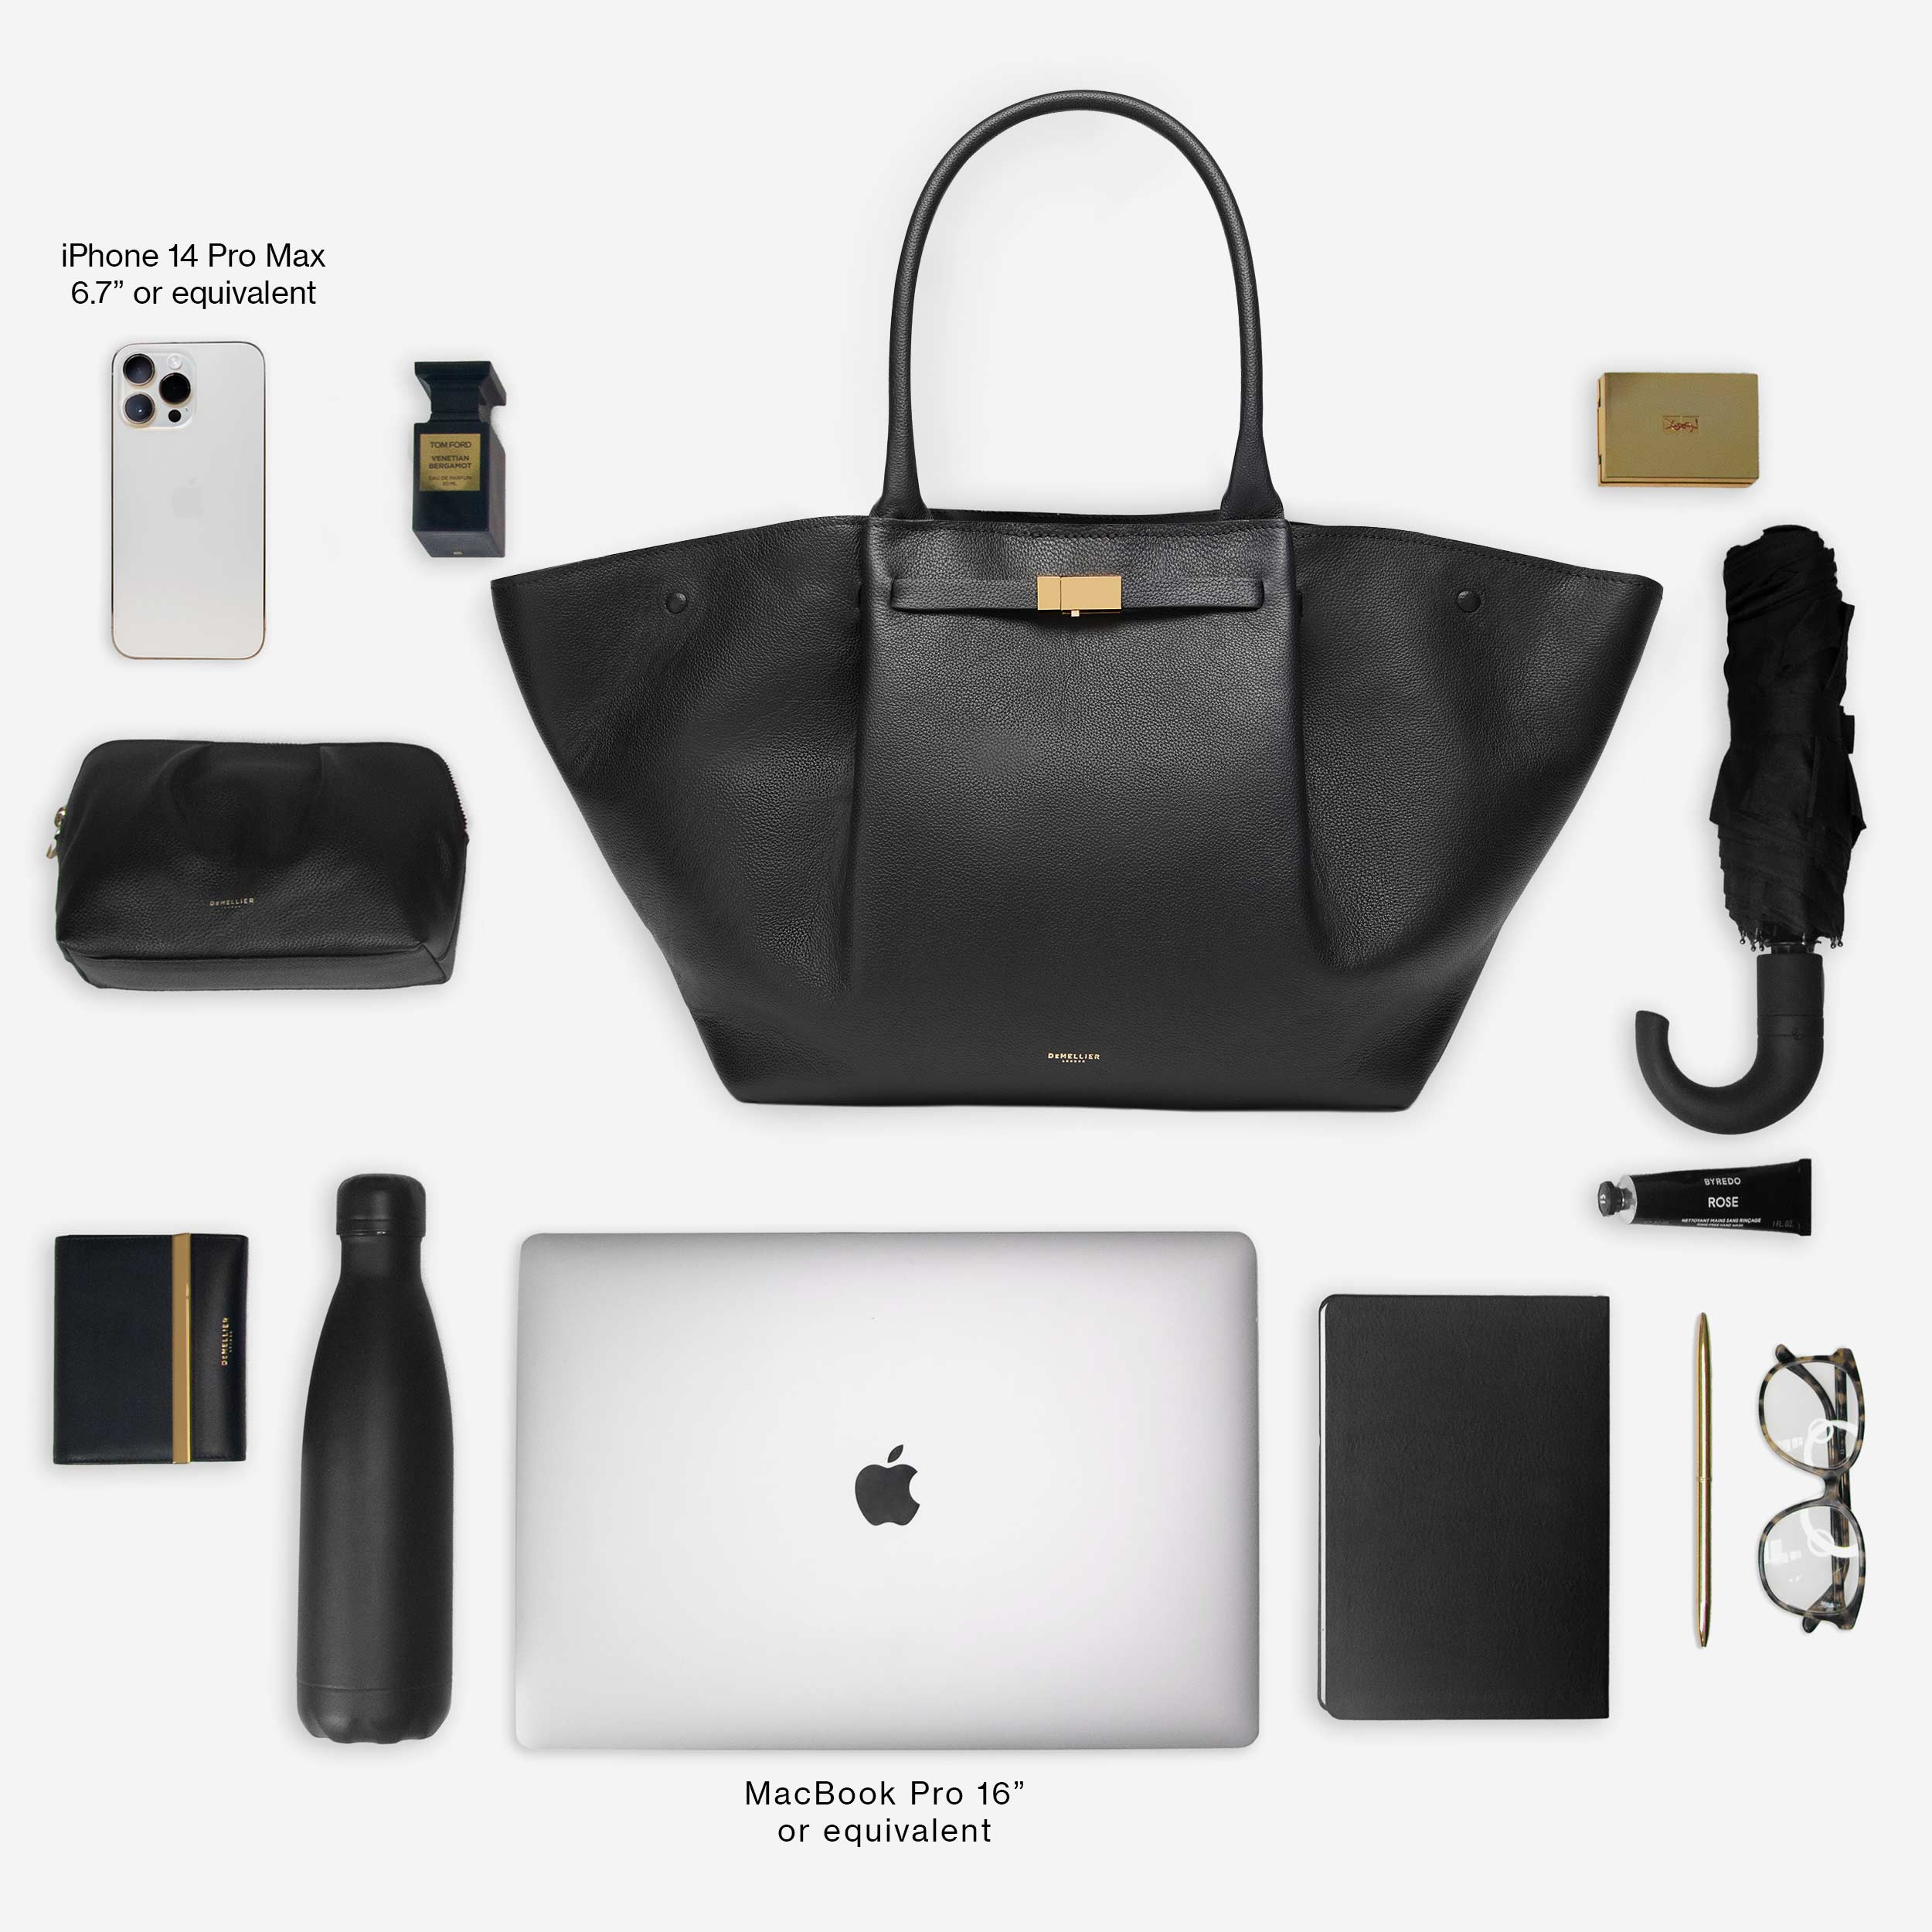 23 Best Laptop Bags for Women Travelers On the Go